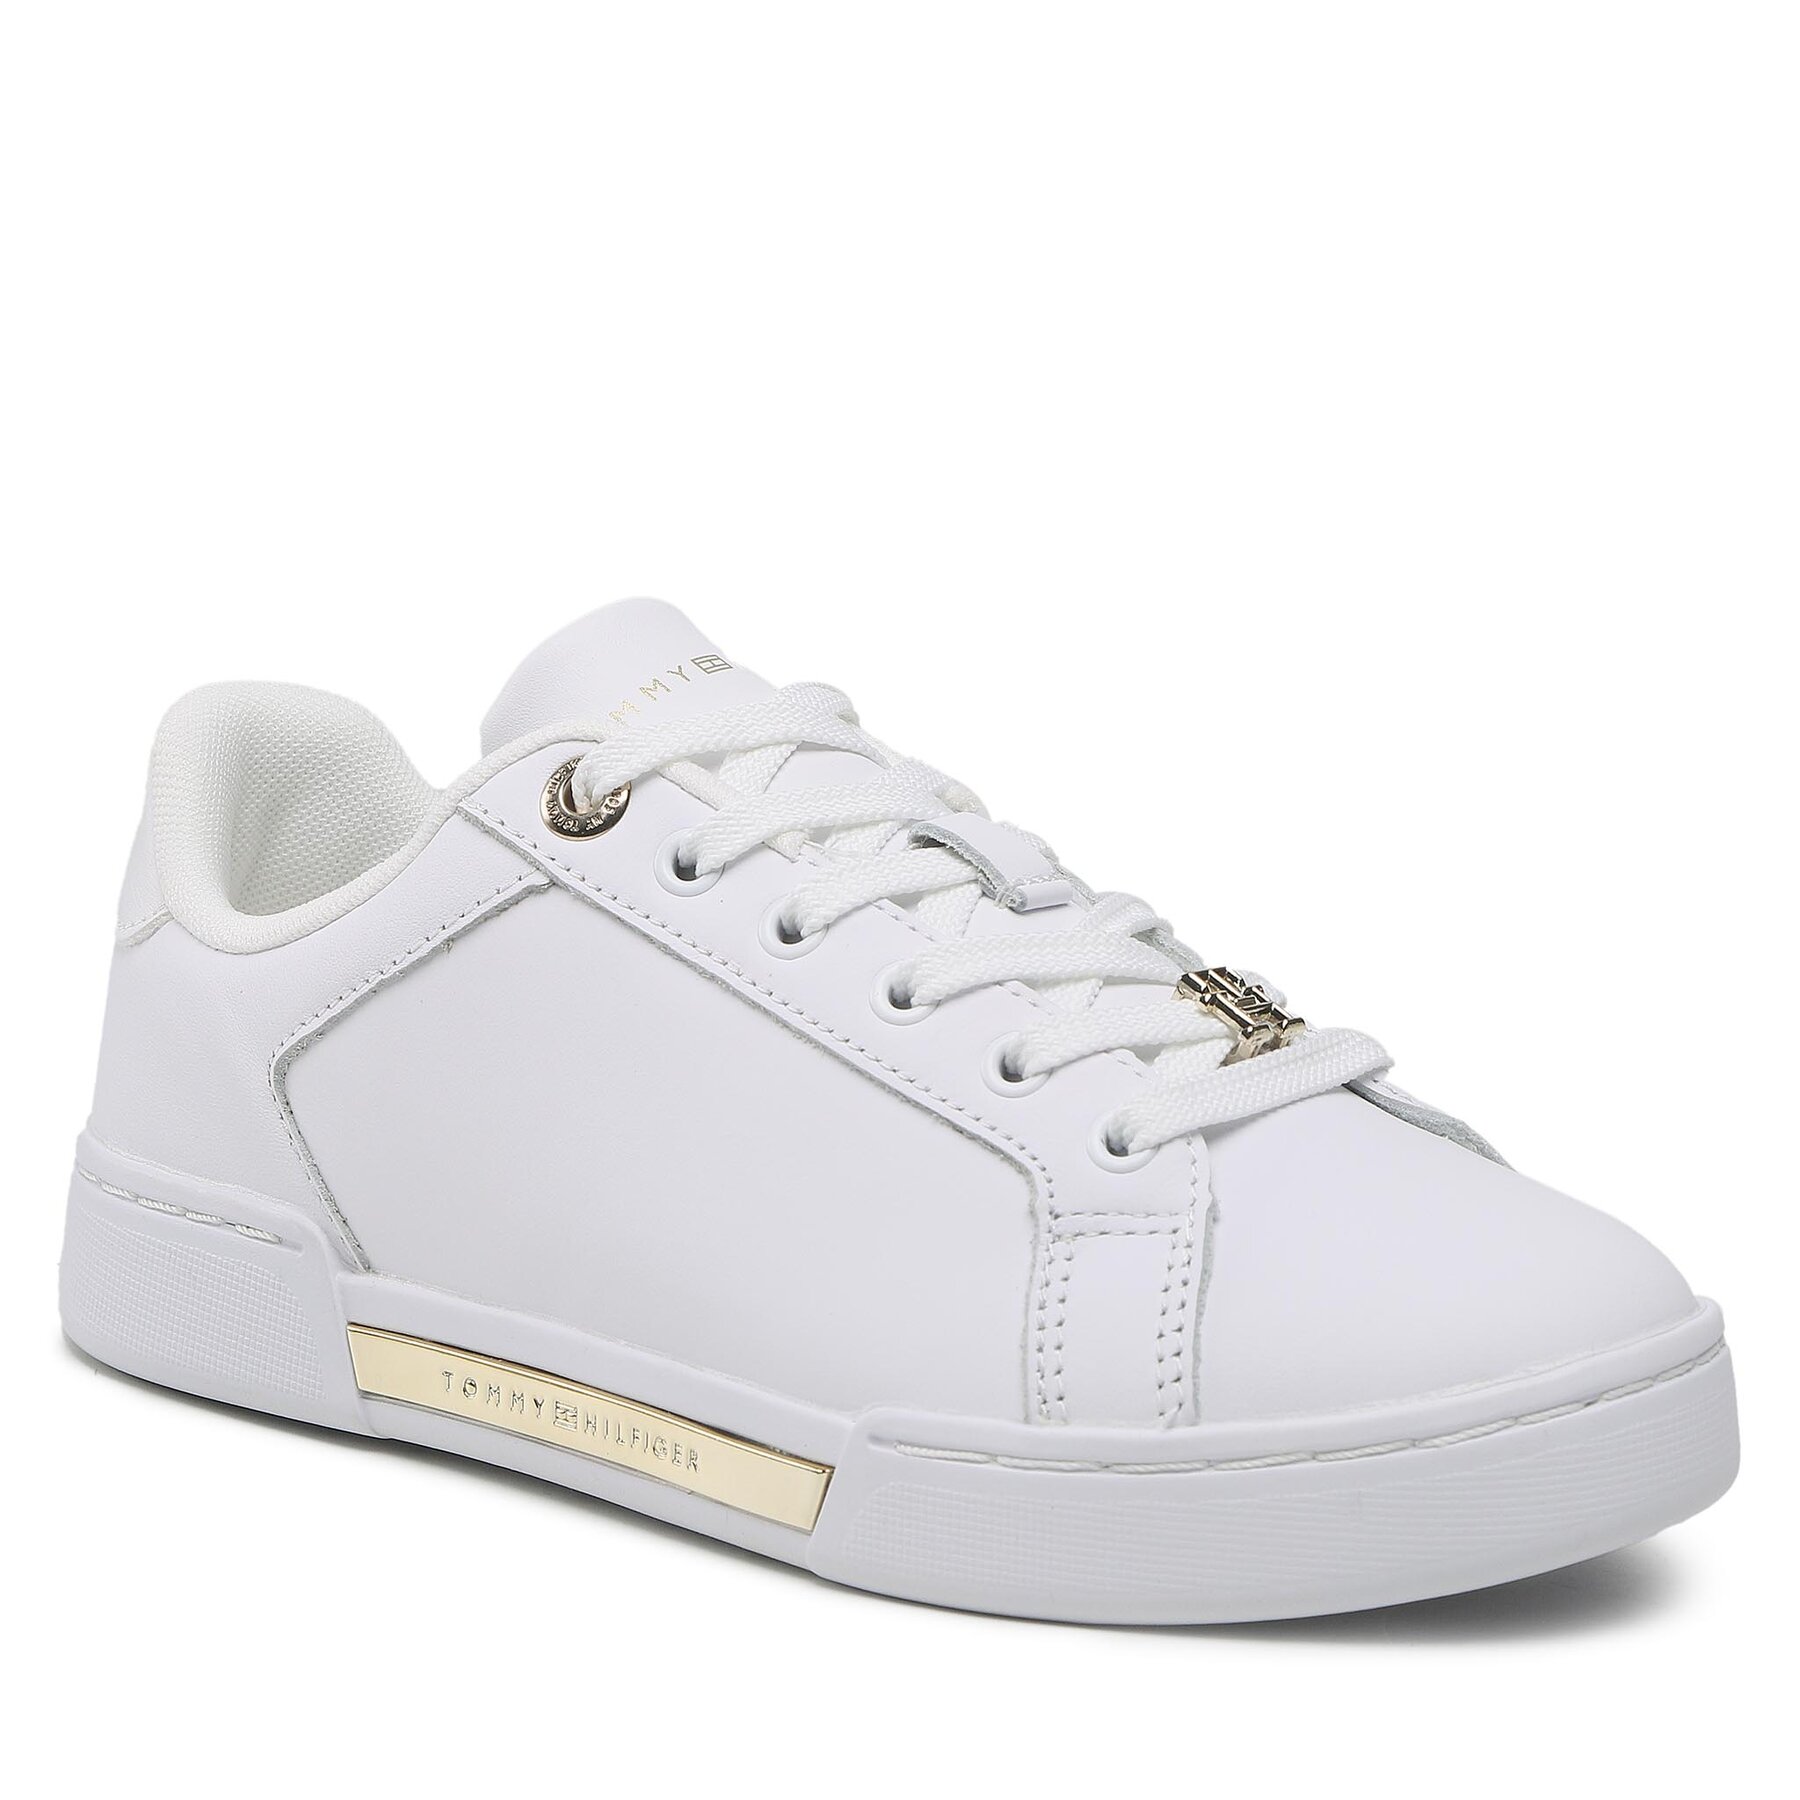 Sneakers Tommy Hilfiger Court Sneaker With Lace Hardware FW0FW06908 White/Gold 0K6